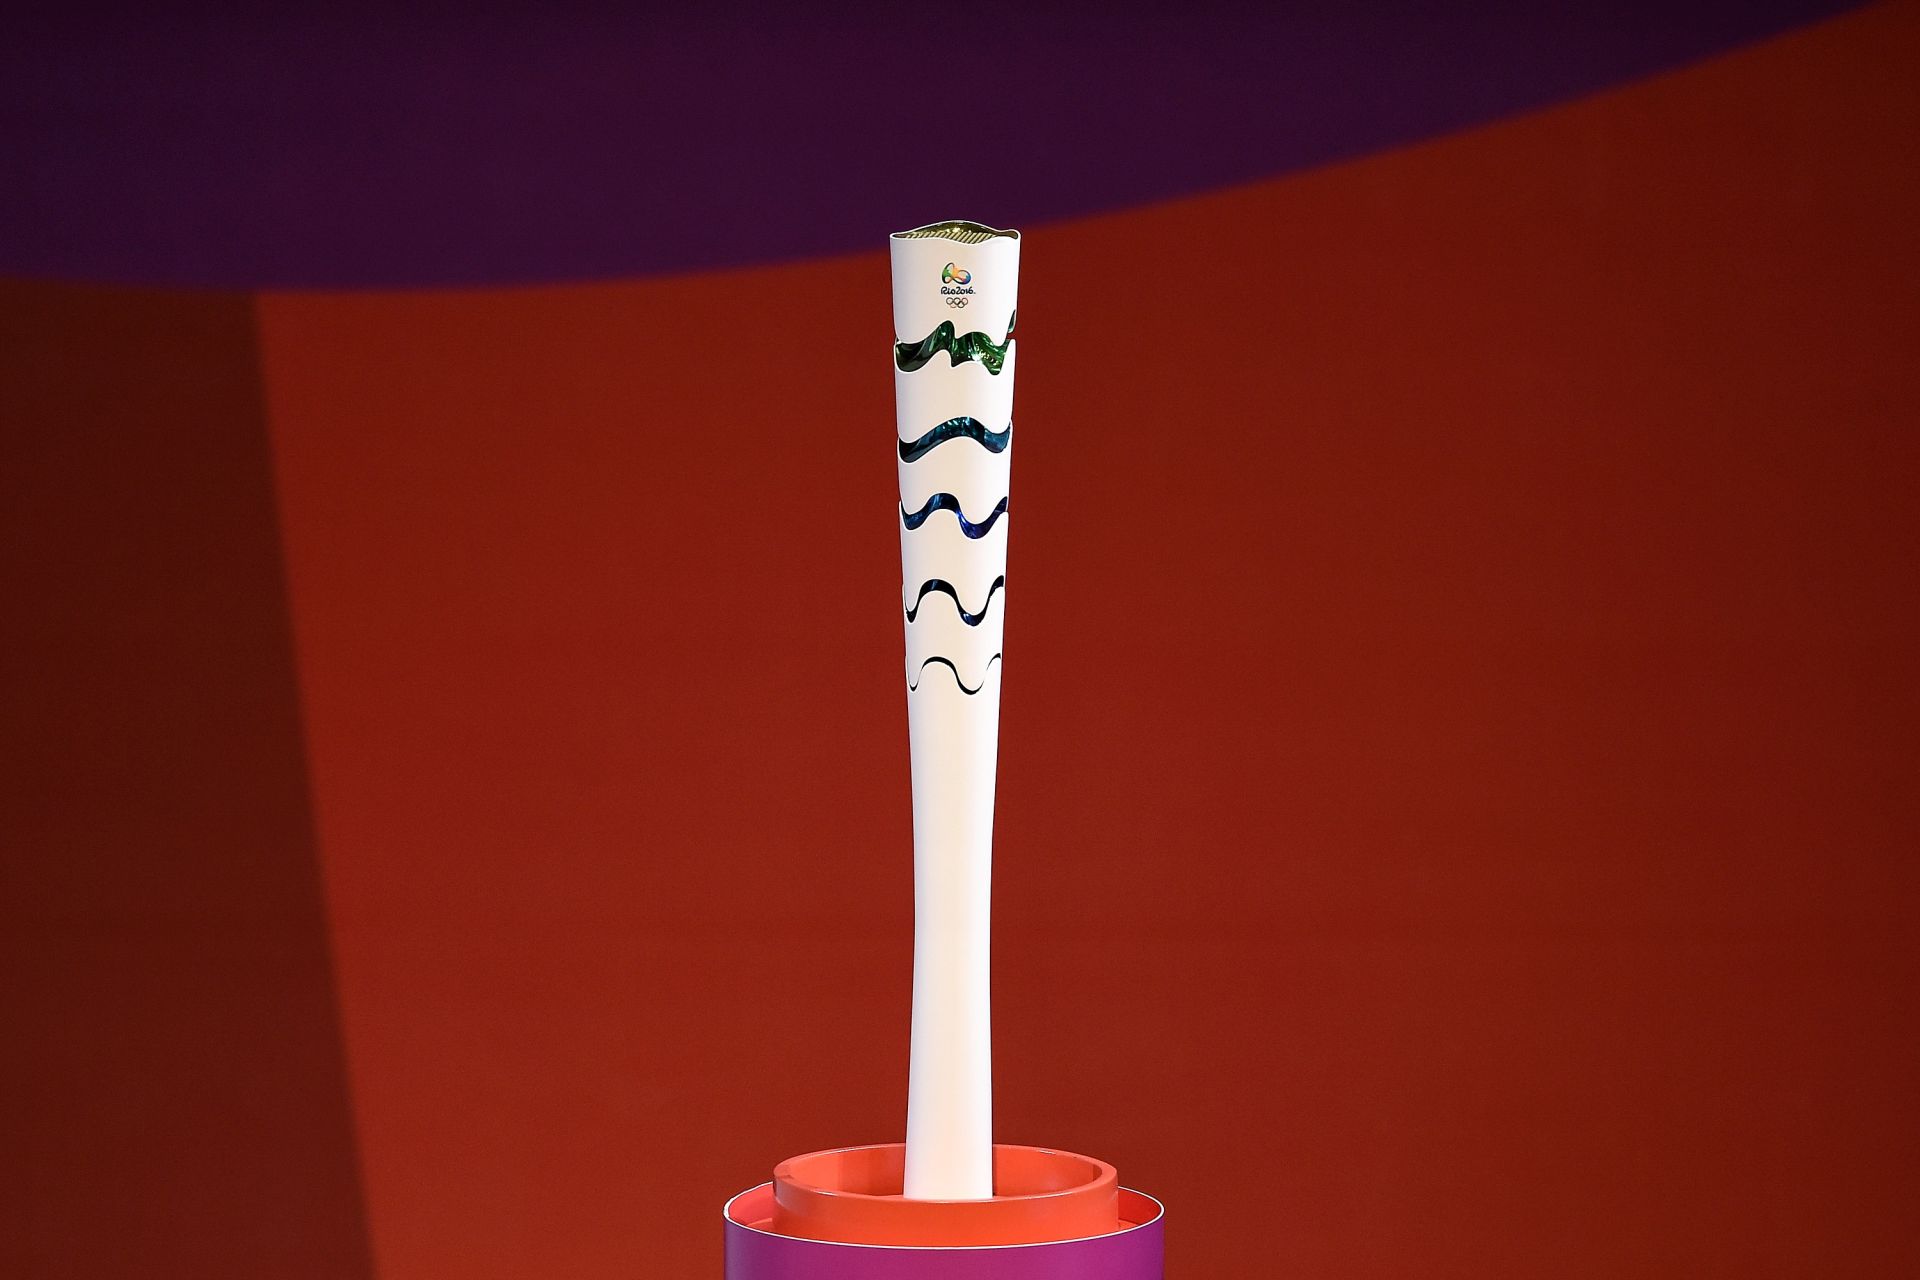 BRASILIA, BRAZIL - JULY 03:  The Rio 2016 Olympic torch is seen during its launching ceremony on July 3, 2015 in Brasilia, Brazil.  (Photo by Buda Mendes/Getty Images)